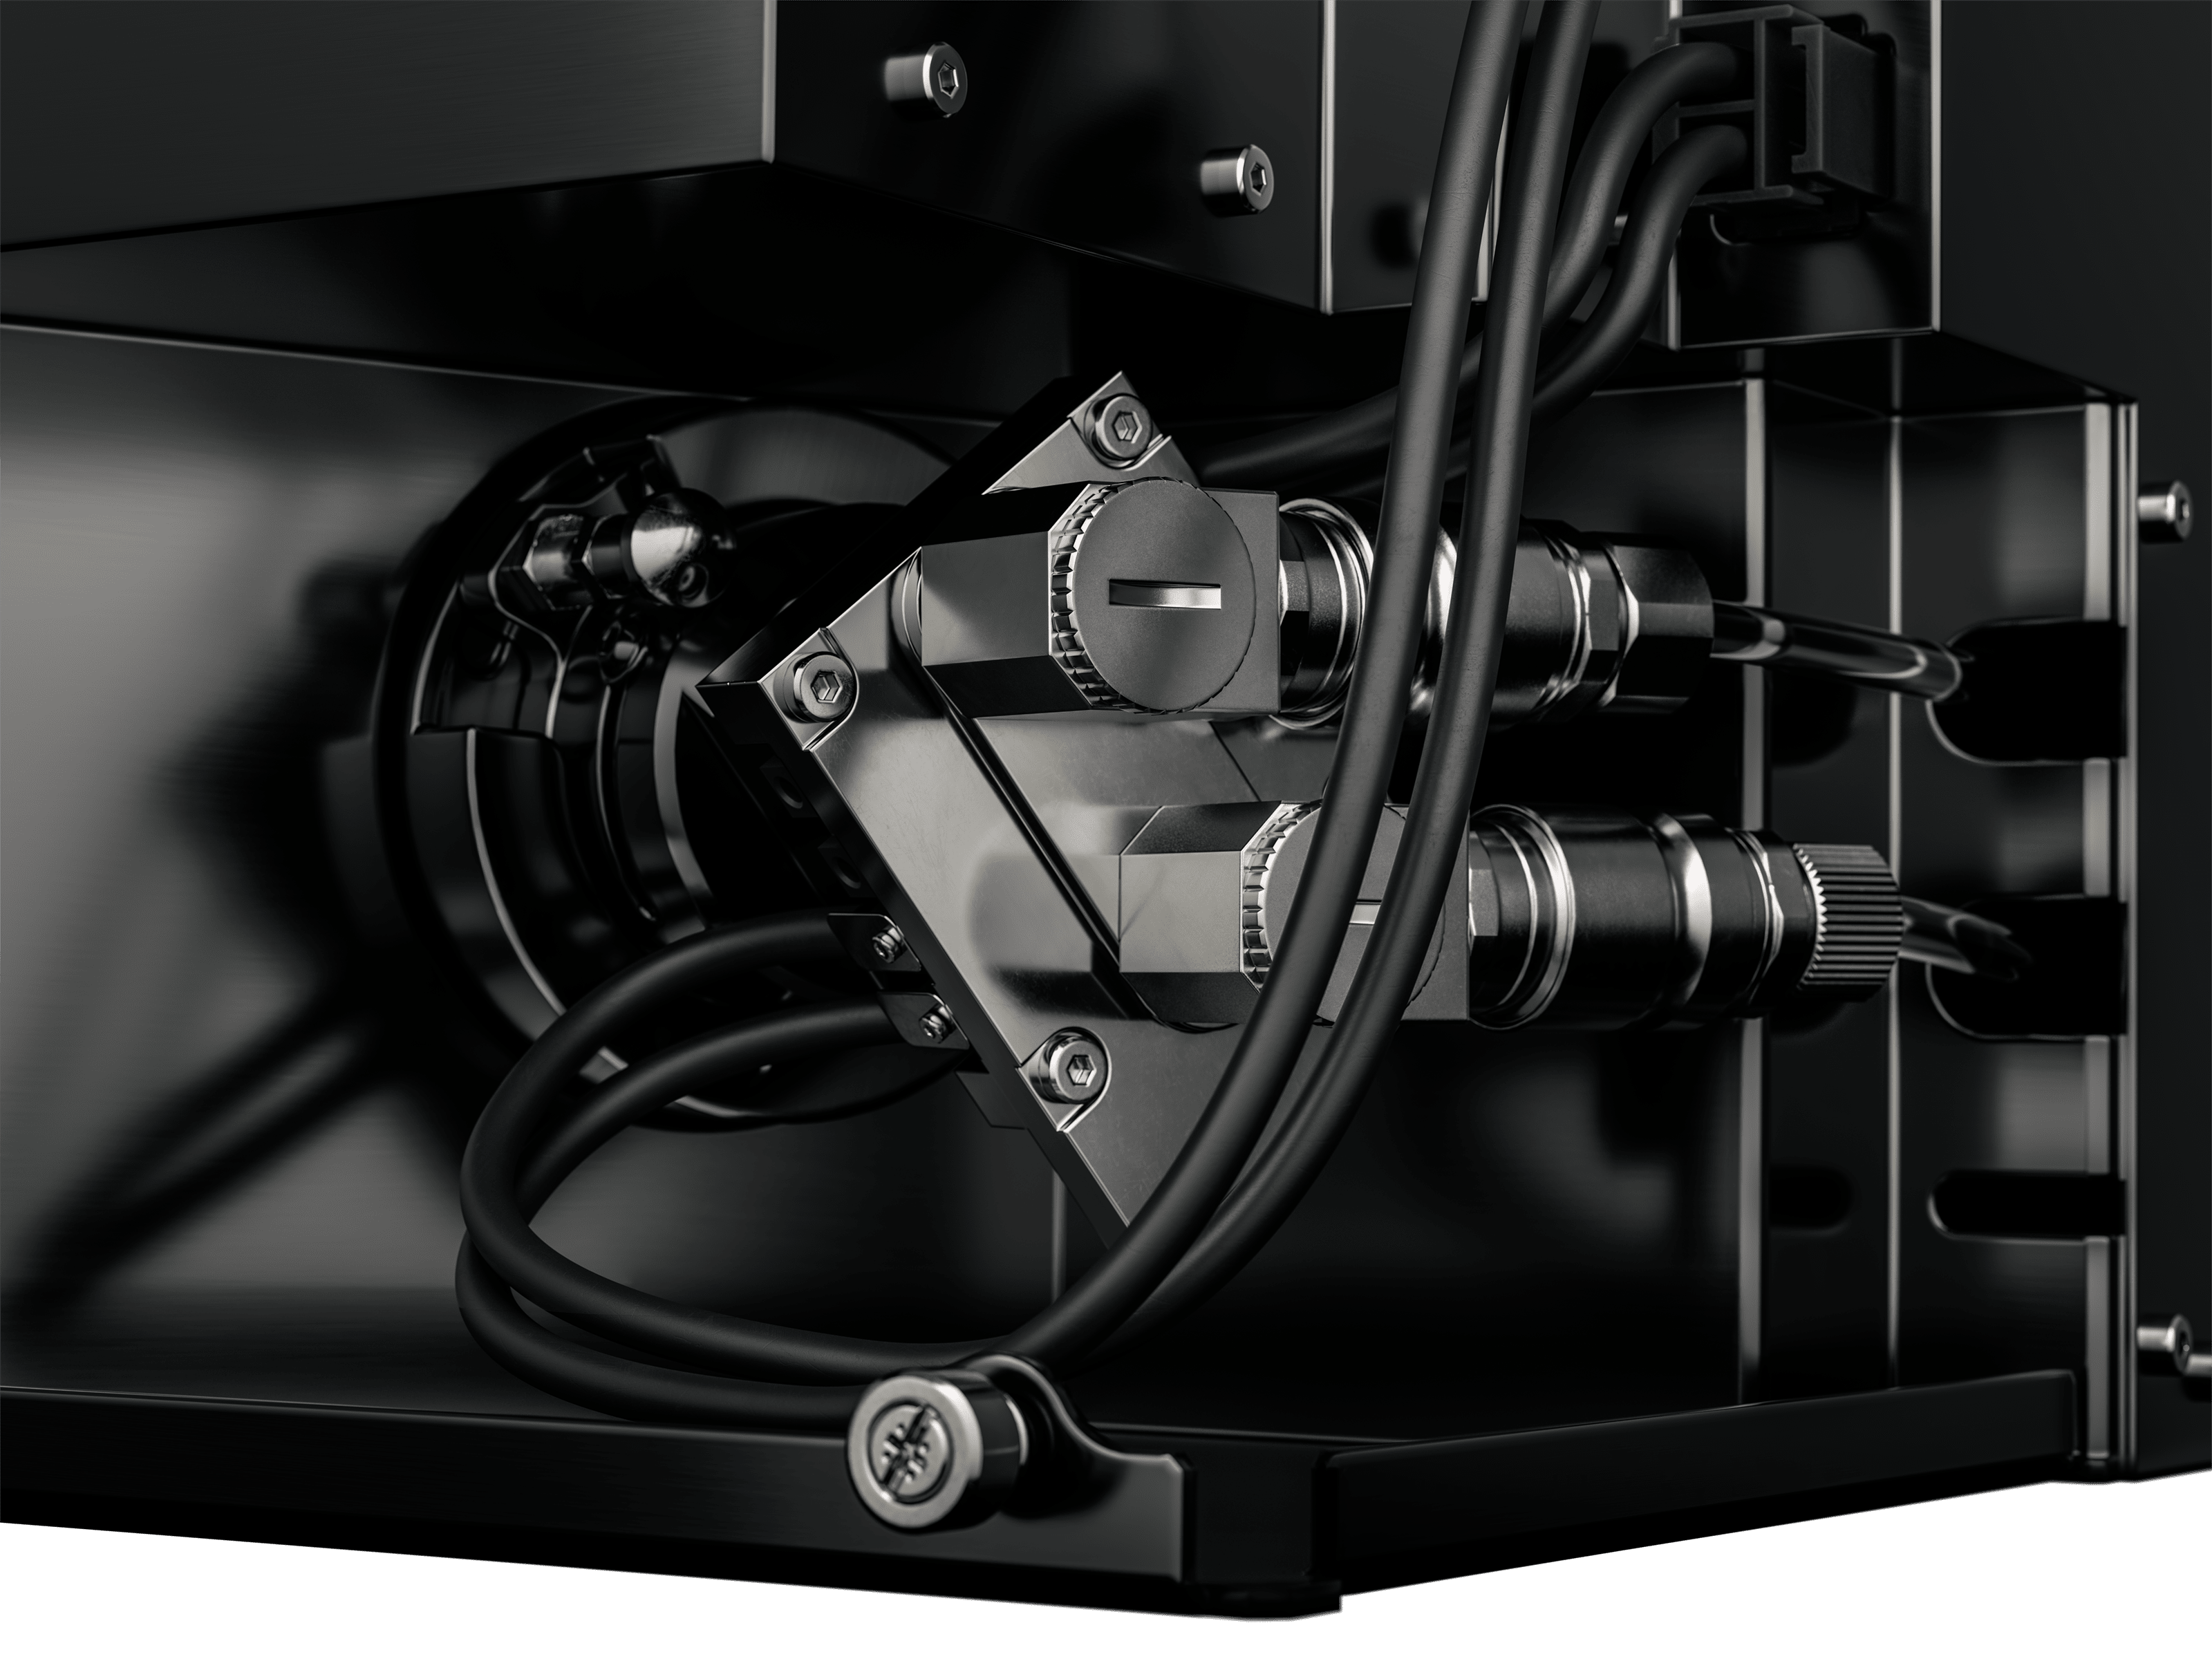 details of the dlp uv projector Helios - strongest Light Engine on the market